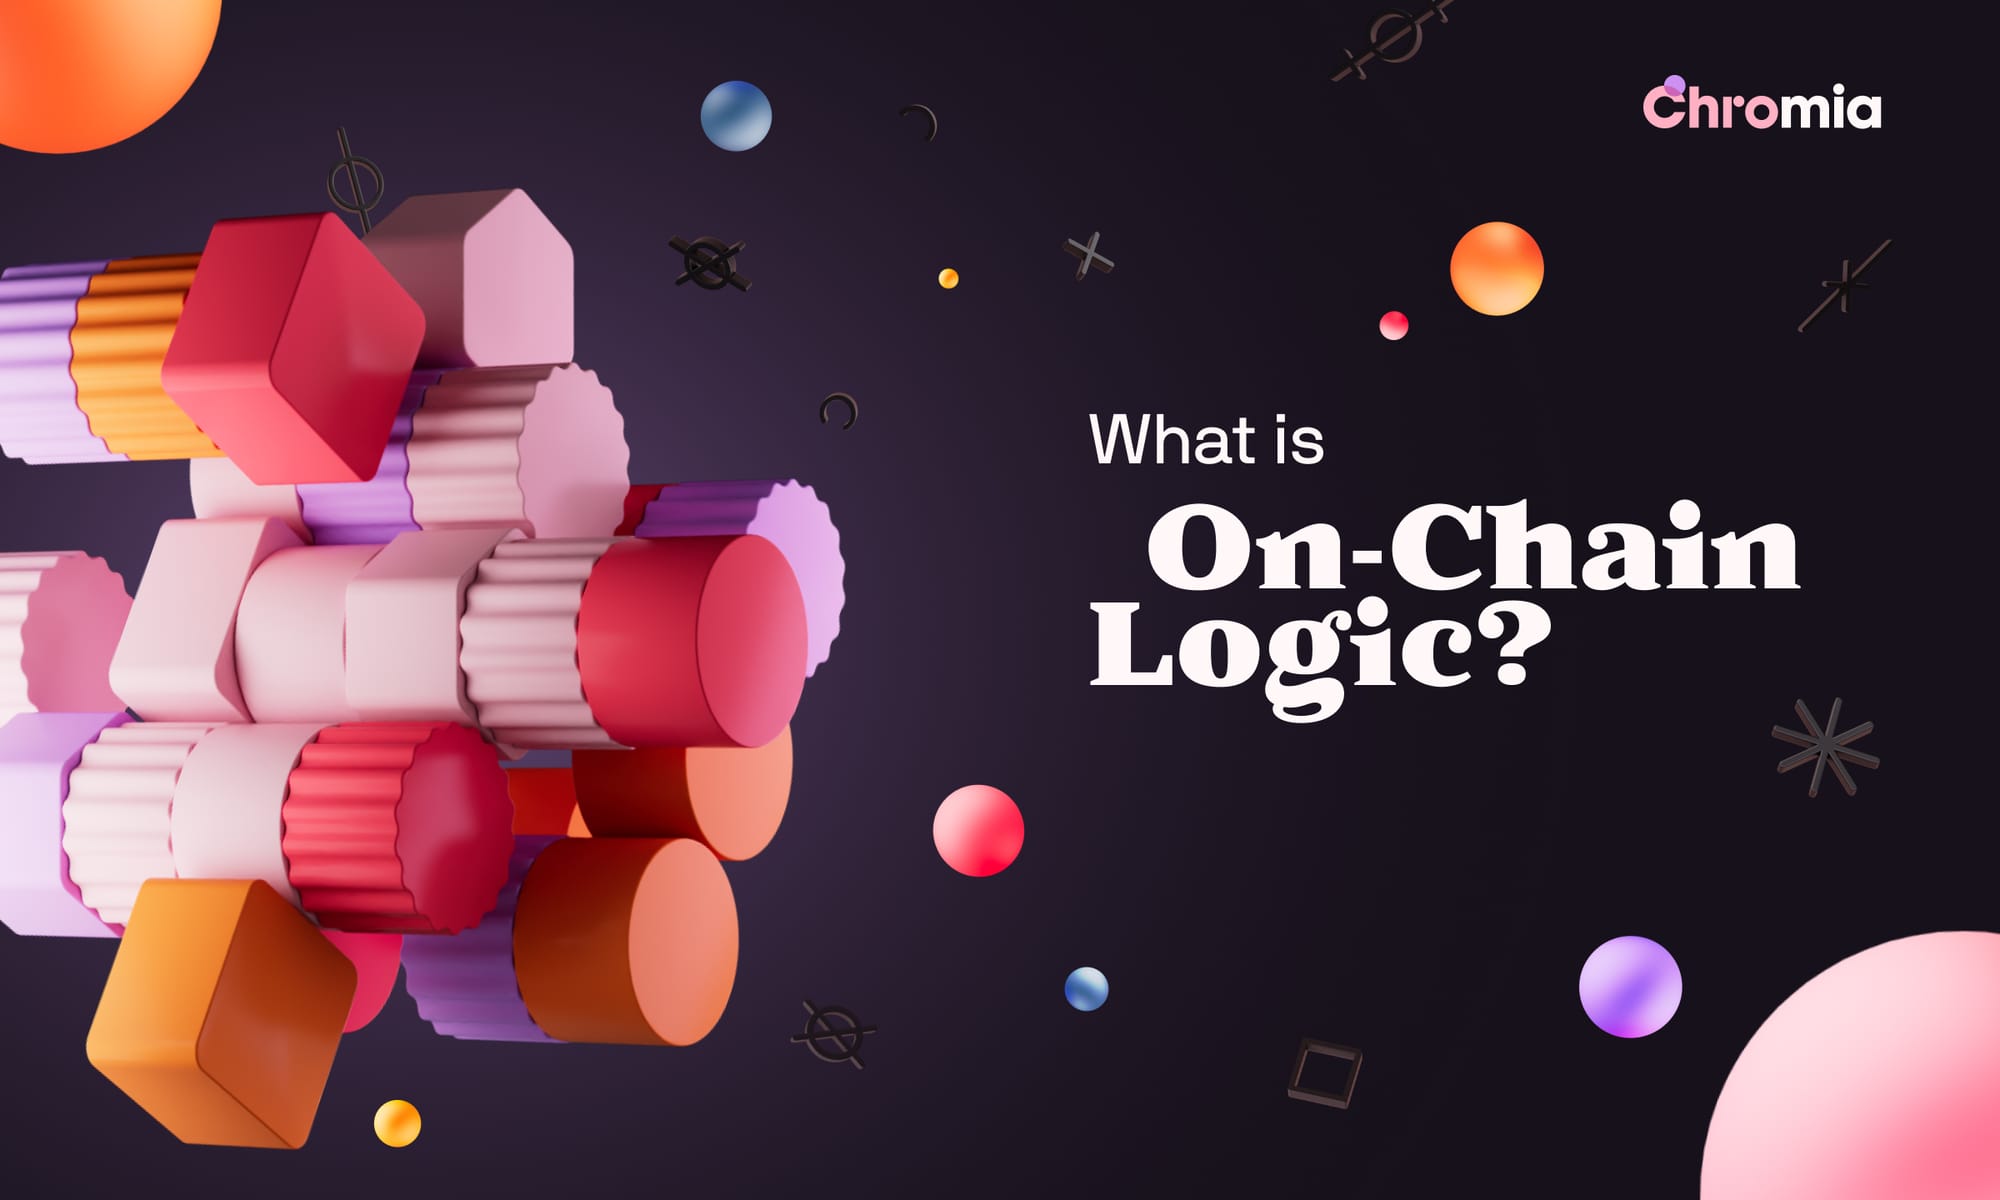 Chromia Explained: What Exactly is "On-Chain Logic"?